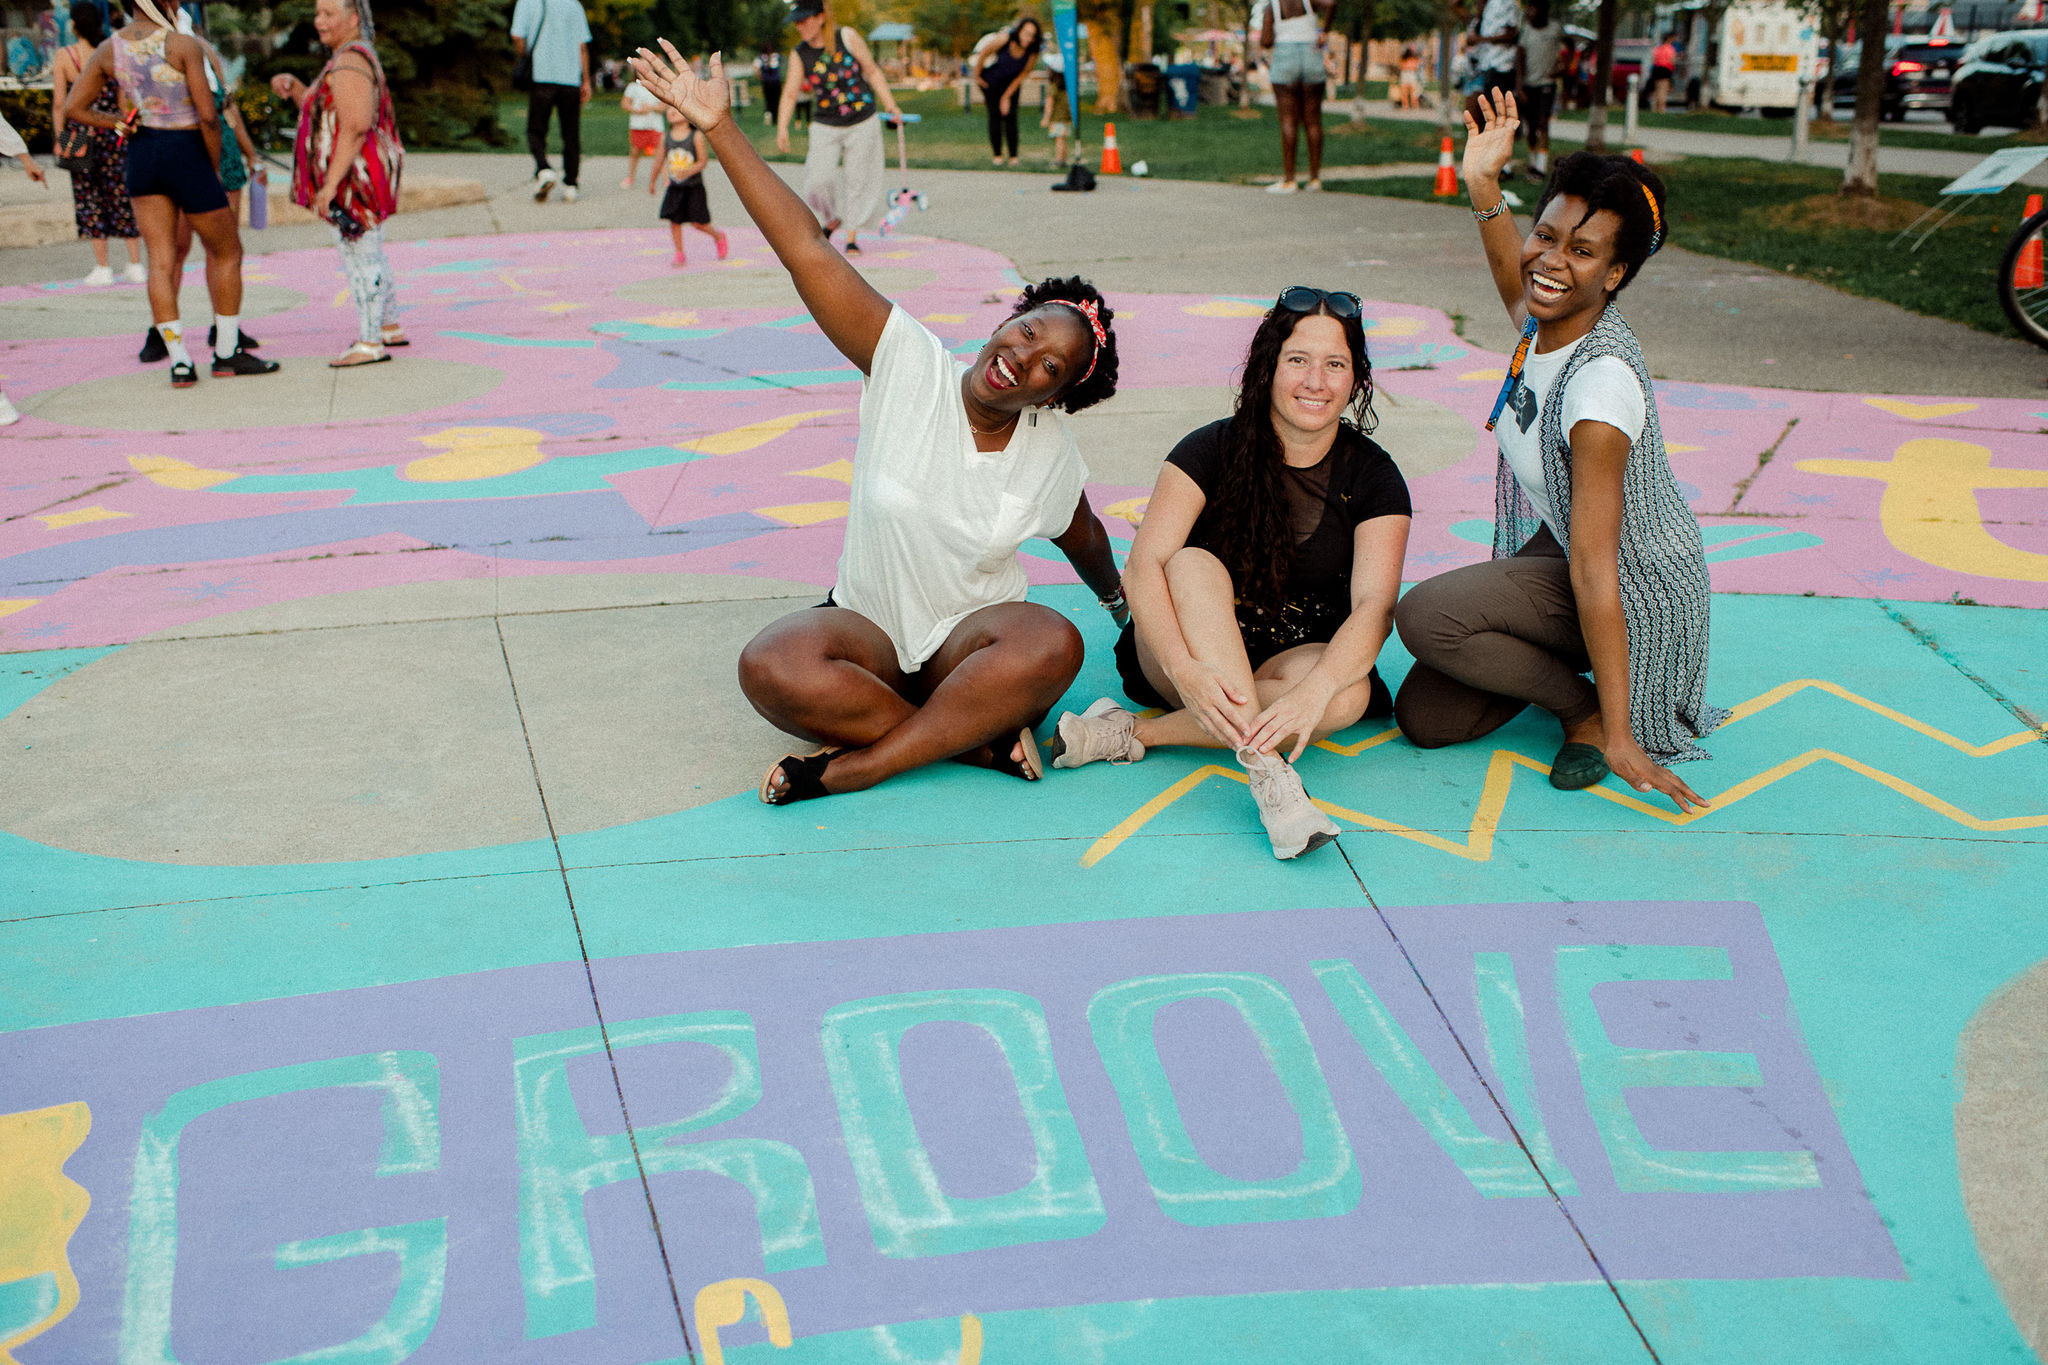 Three women sit in front of the word "groove" which is painted on pavement. They are smiling and looking directly at the camera.